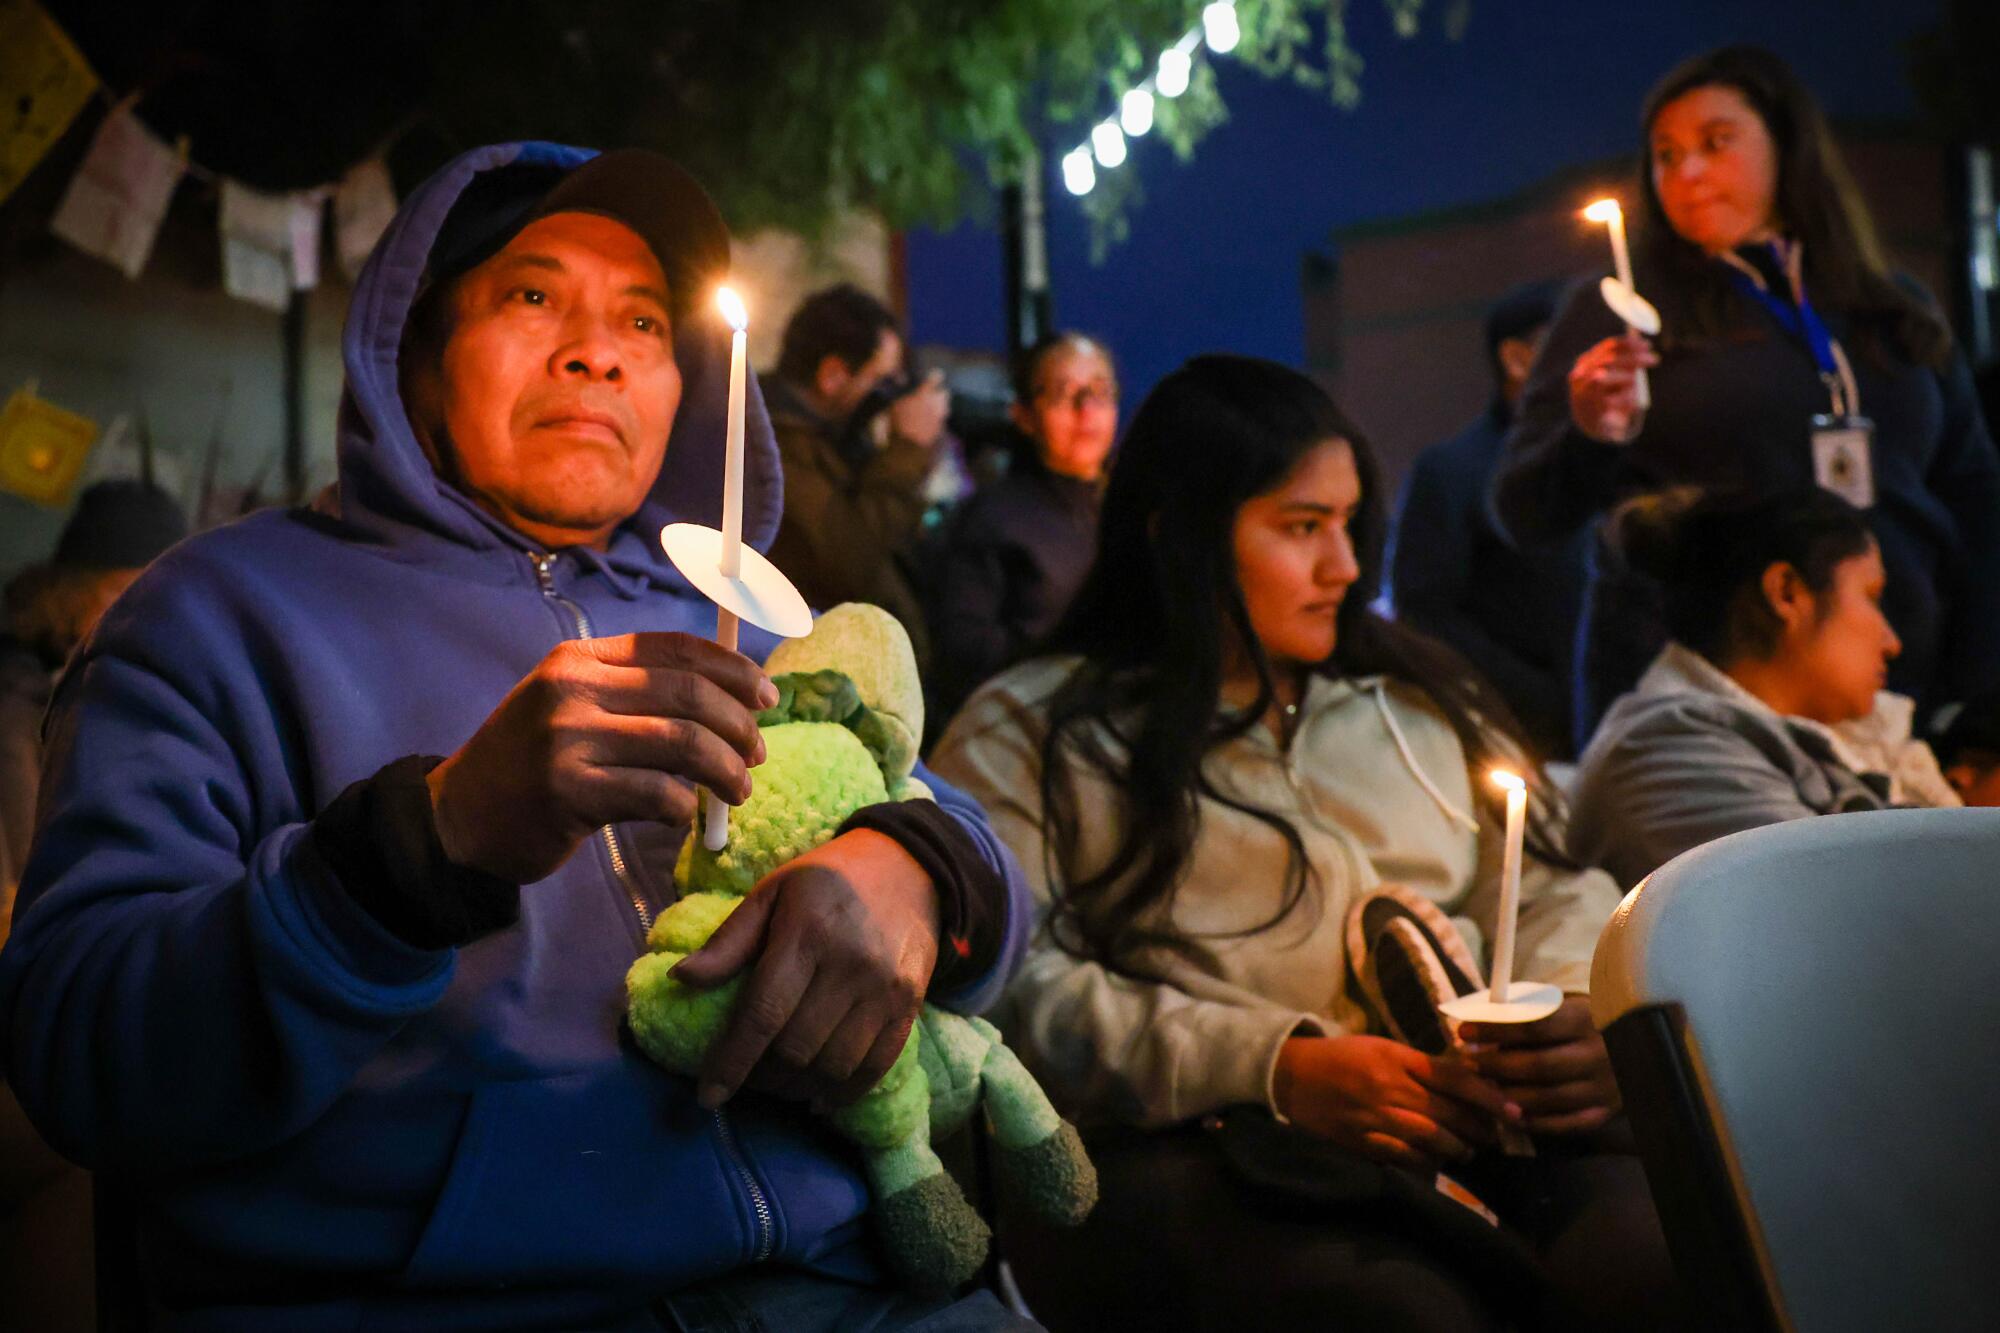 A man is holding a candle and stuffed animal and is sitting next to others at a vigil